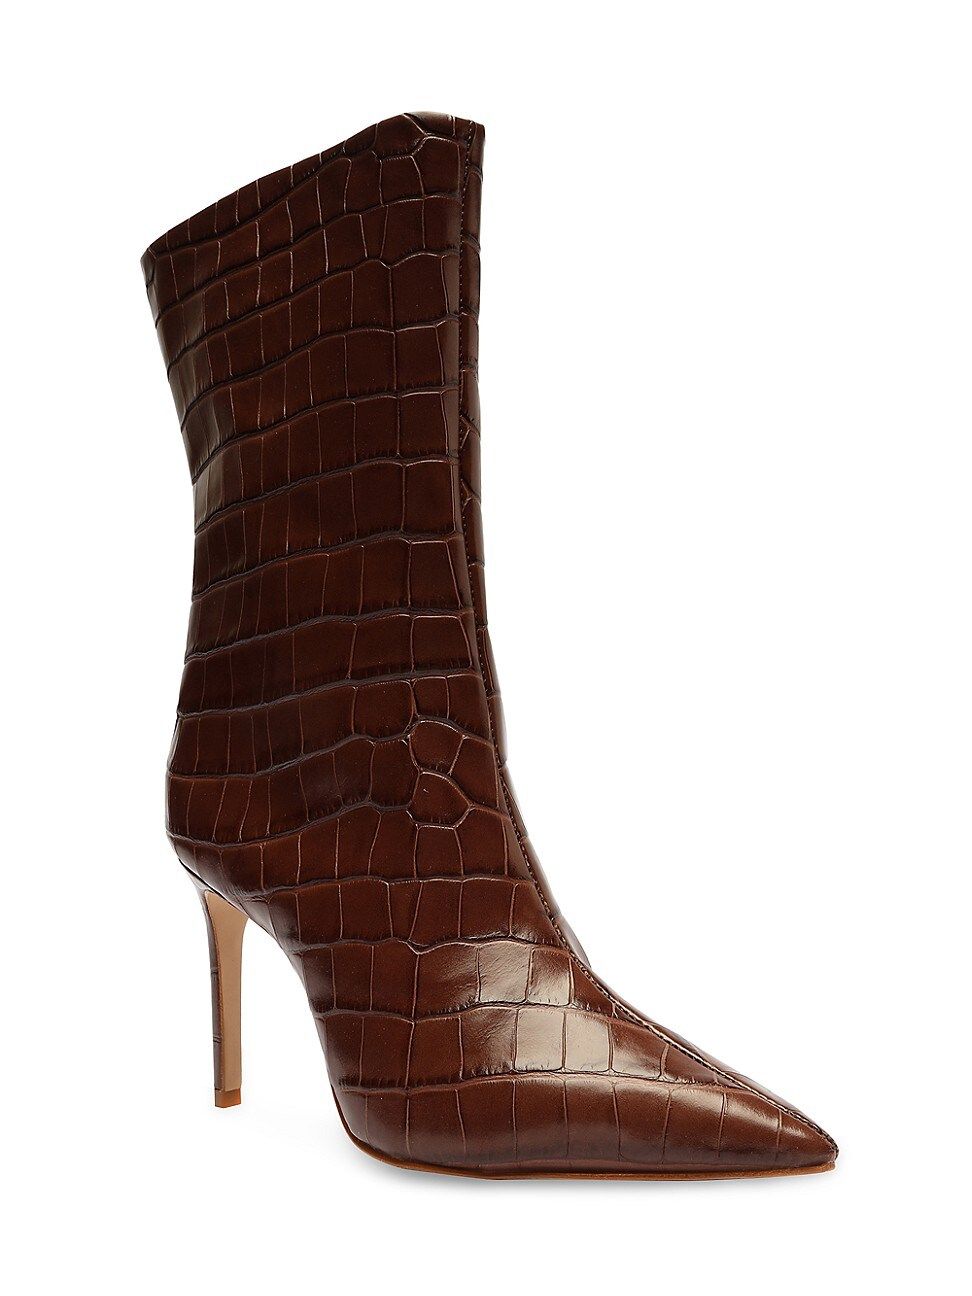 Women's Mary Croc-Embossed Leather Short Boots - New Cognac - Size 7.5 - New Cognac - Size 7.5 | Saks Fifth Avenue